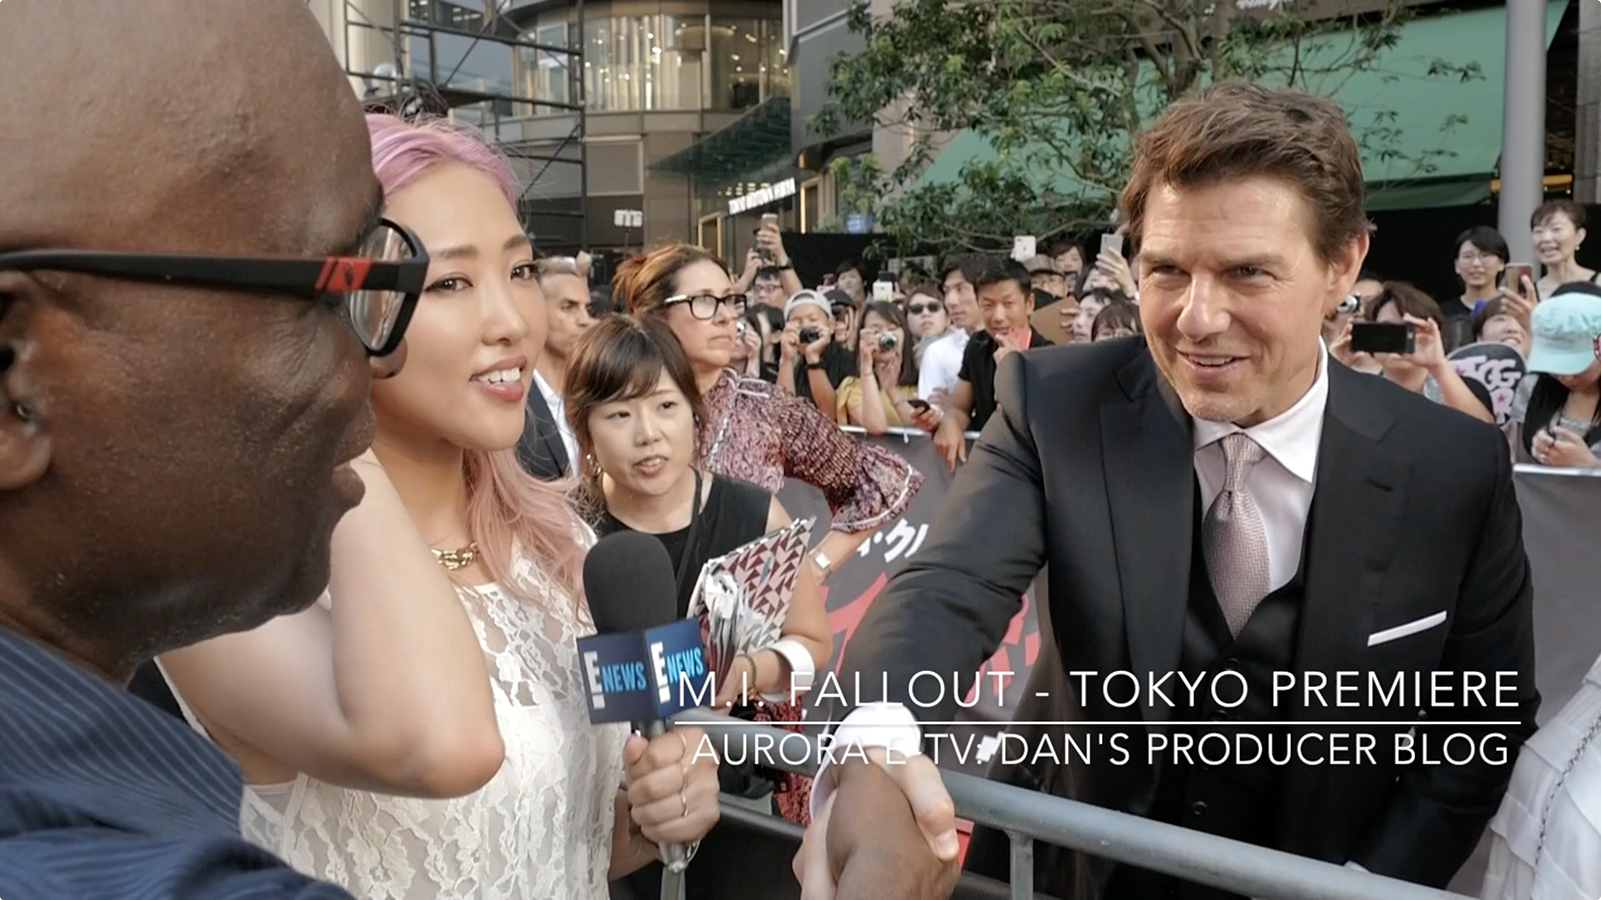 Mission Impossible: Fallout - Tokyo Premier